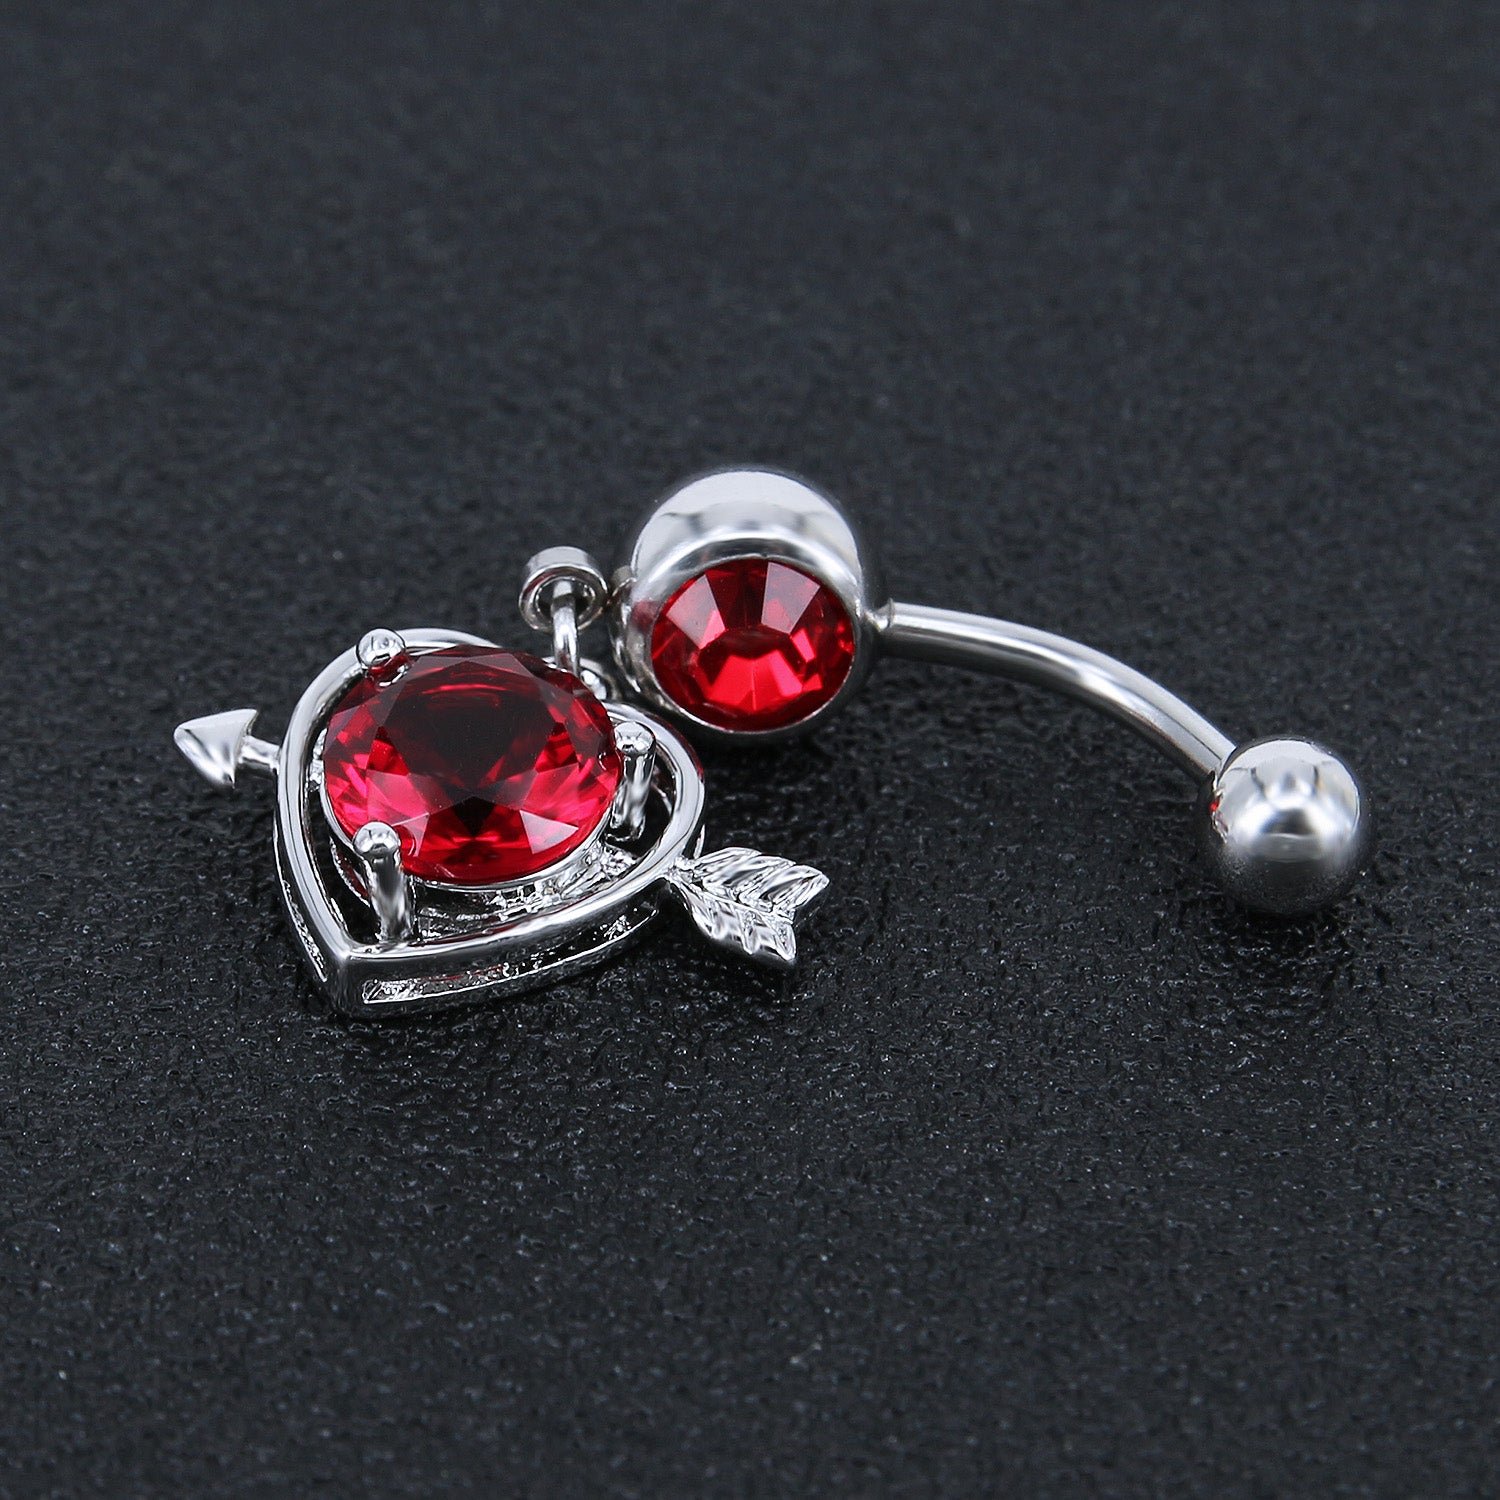 14g-Heart-Stainless-Steel-Belly-Button-Rings-Red-Zircon-Dangle-Belly-Piercing-Jewelry